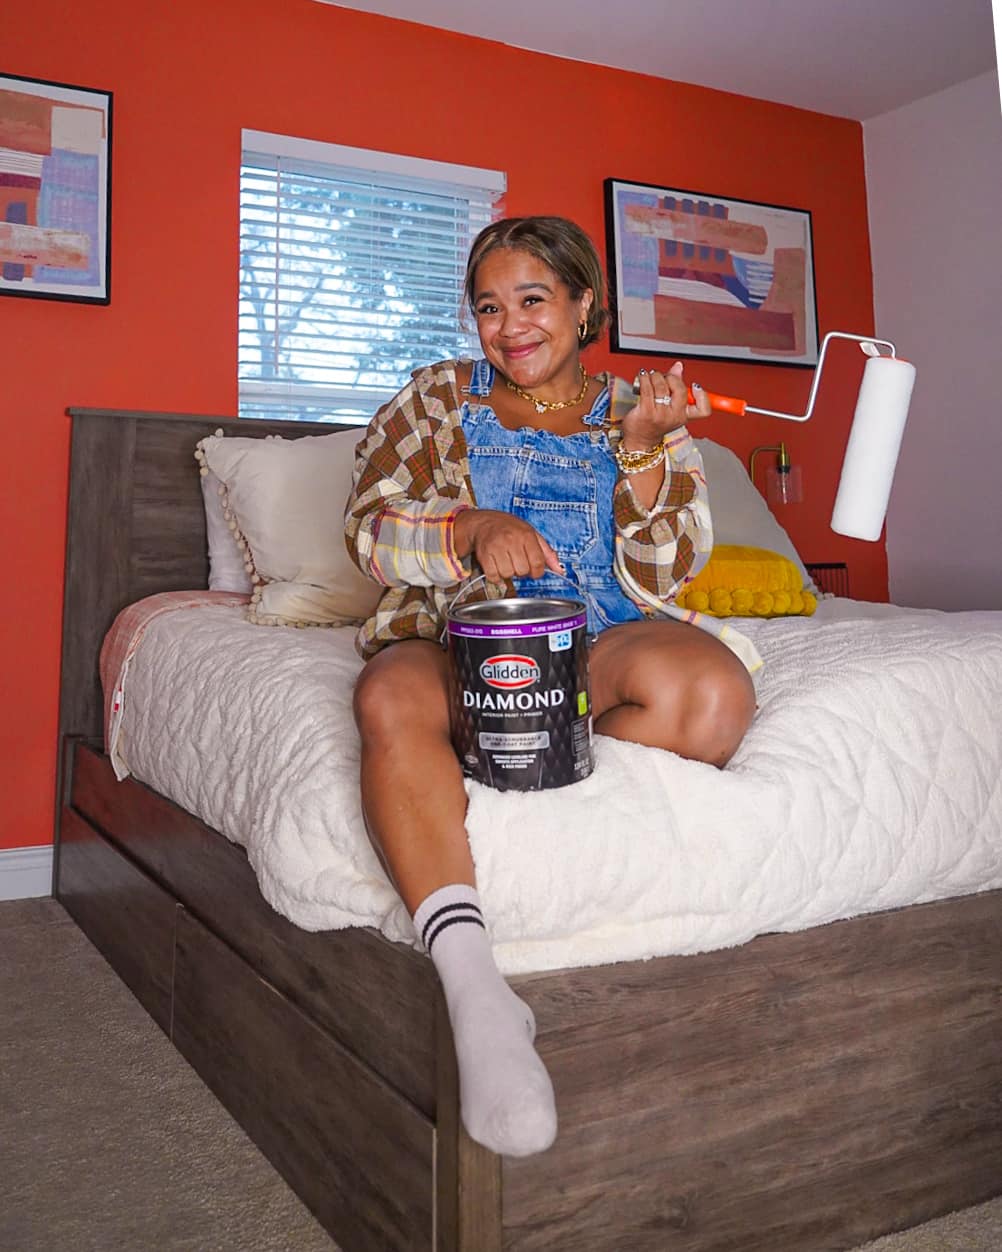 A person sitting on a bed holding a paint can and paint roller.